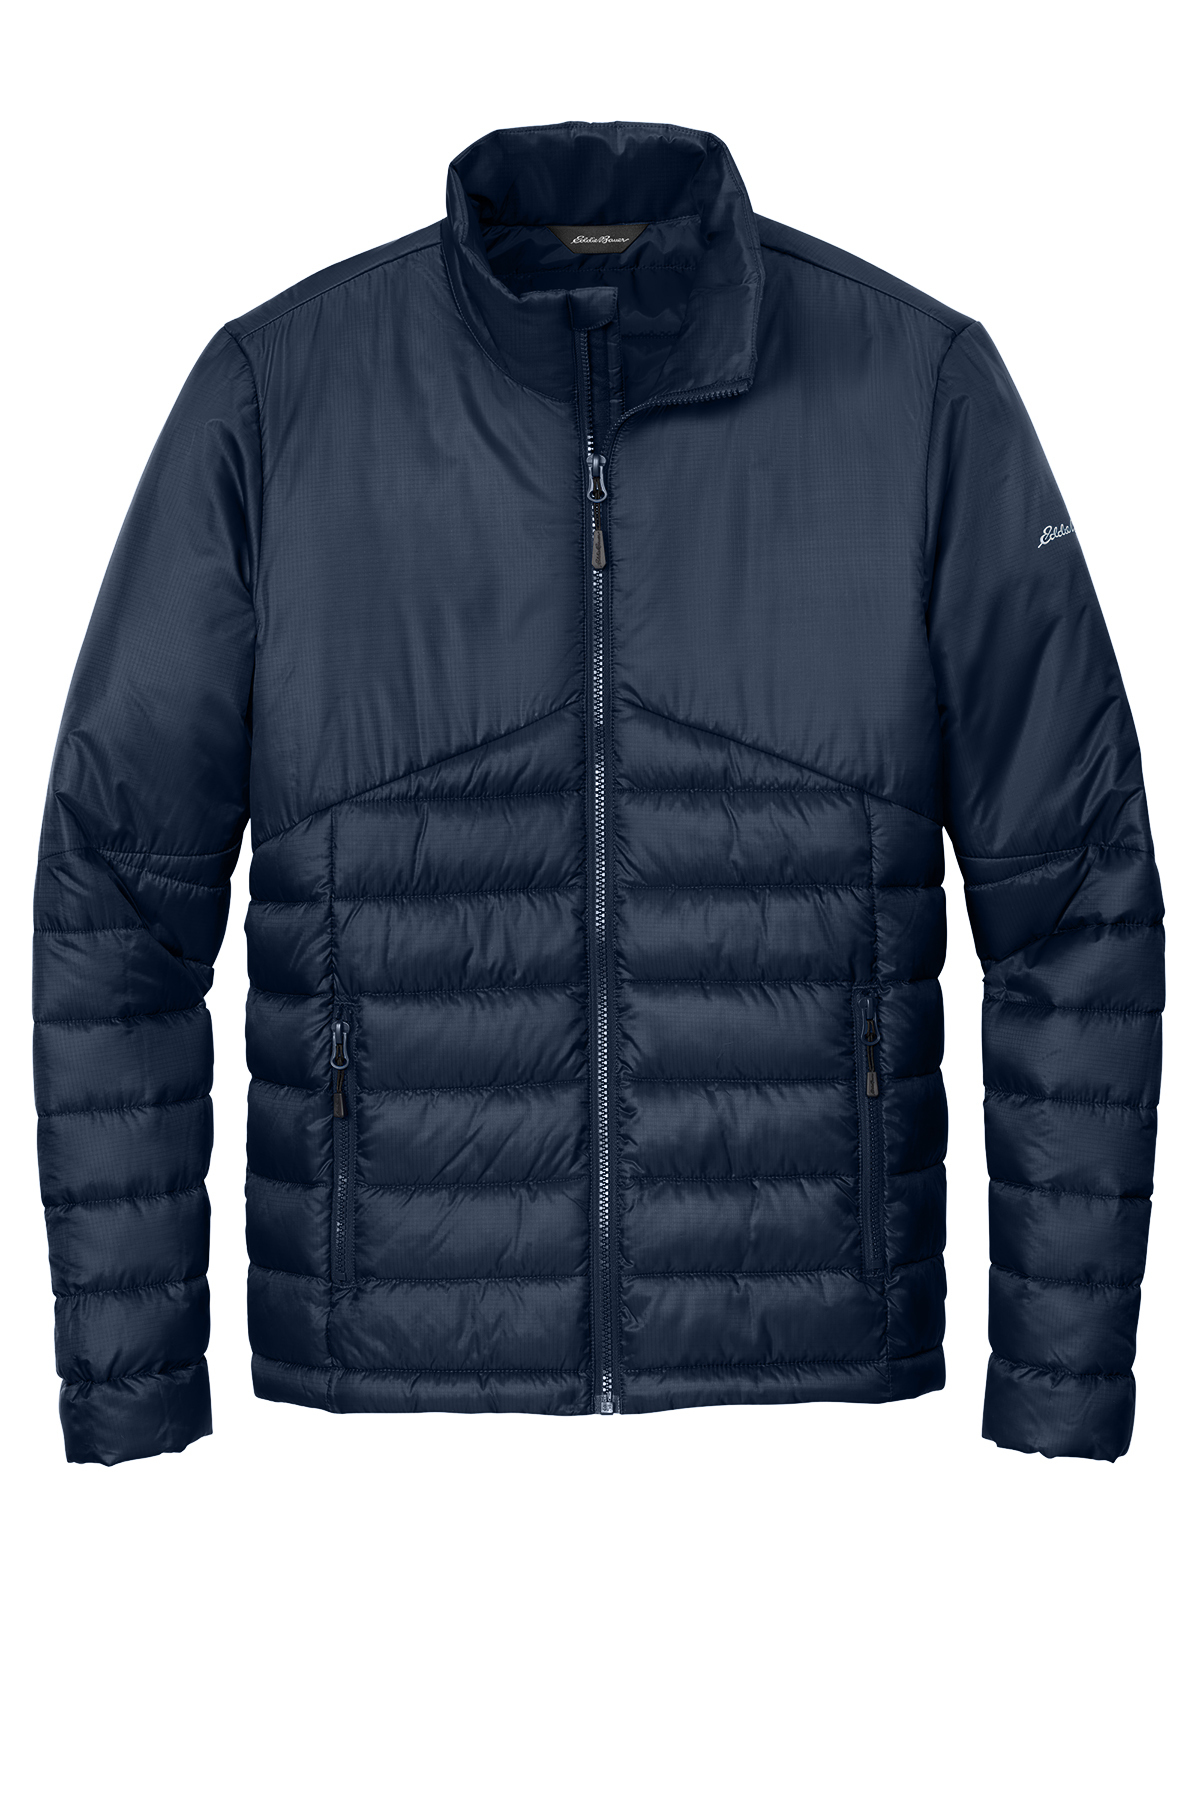 Eddie Bauer Quilted Jacket | Product | Company Casuals